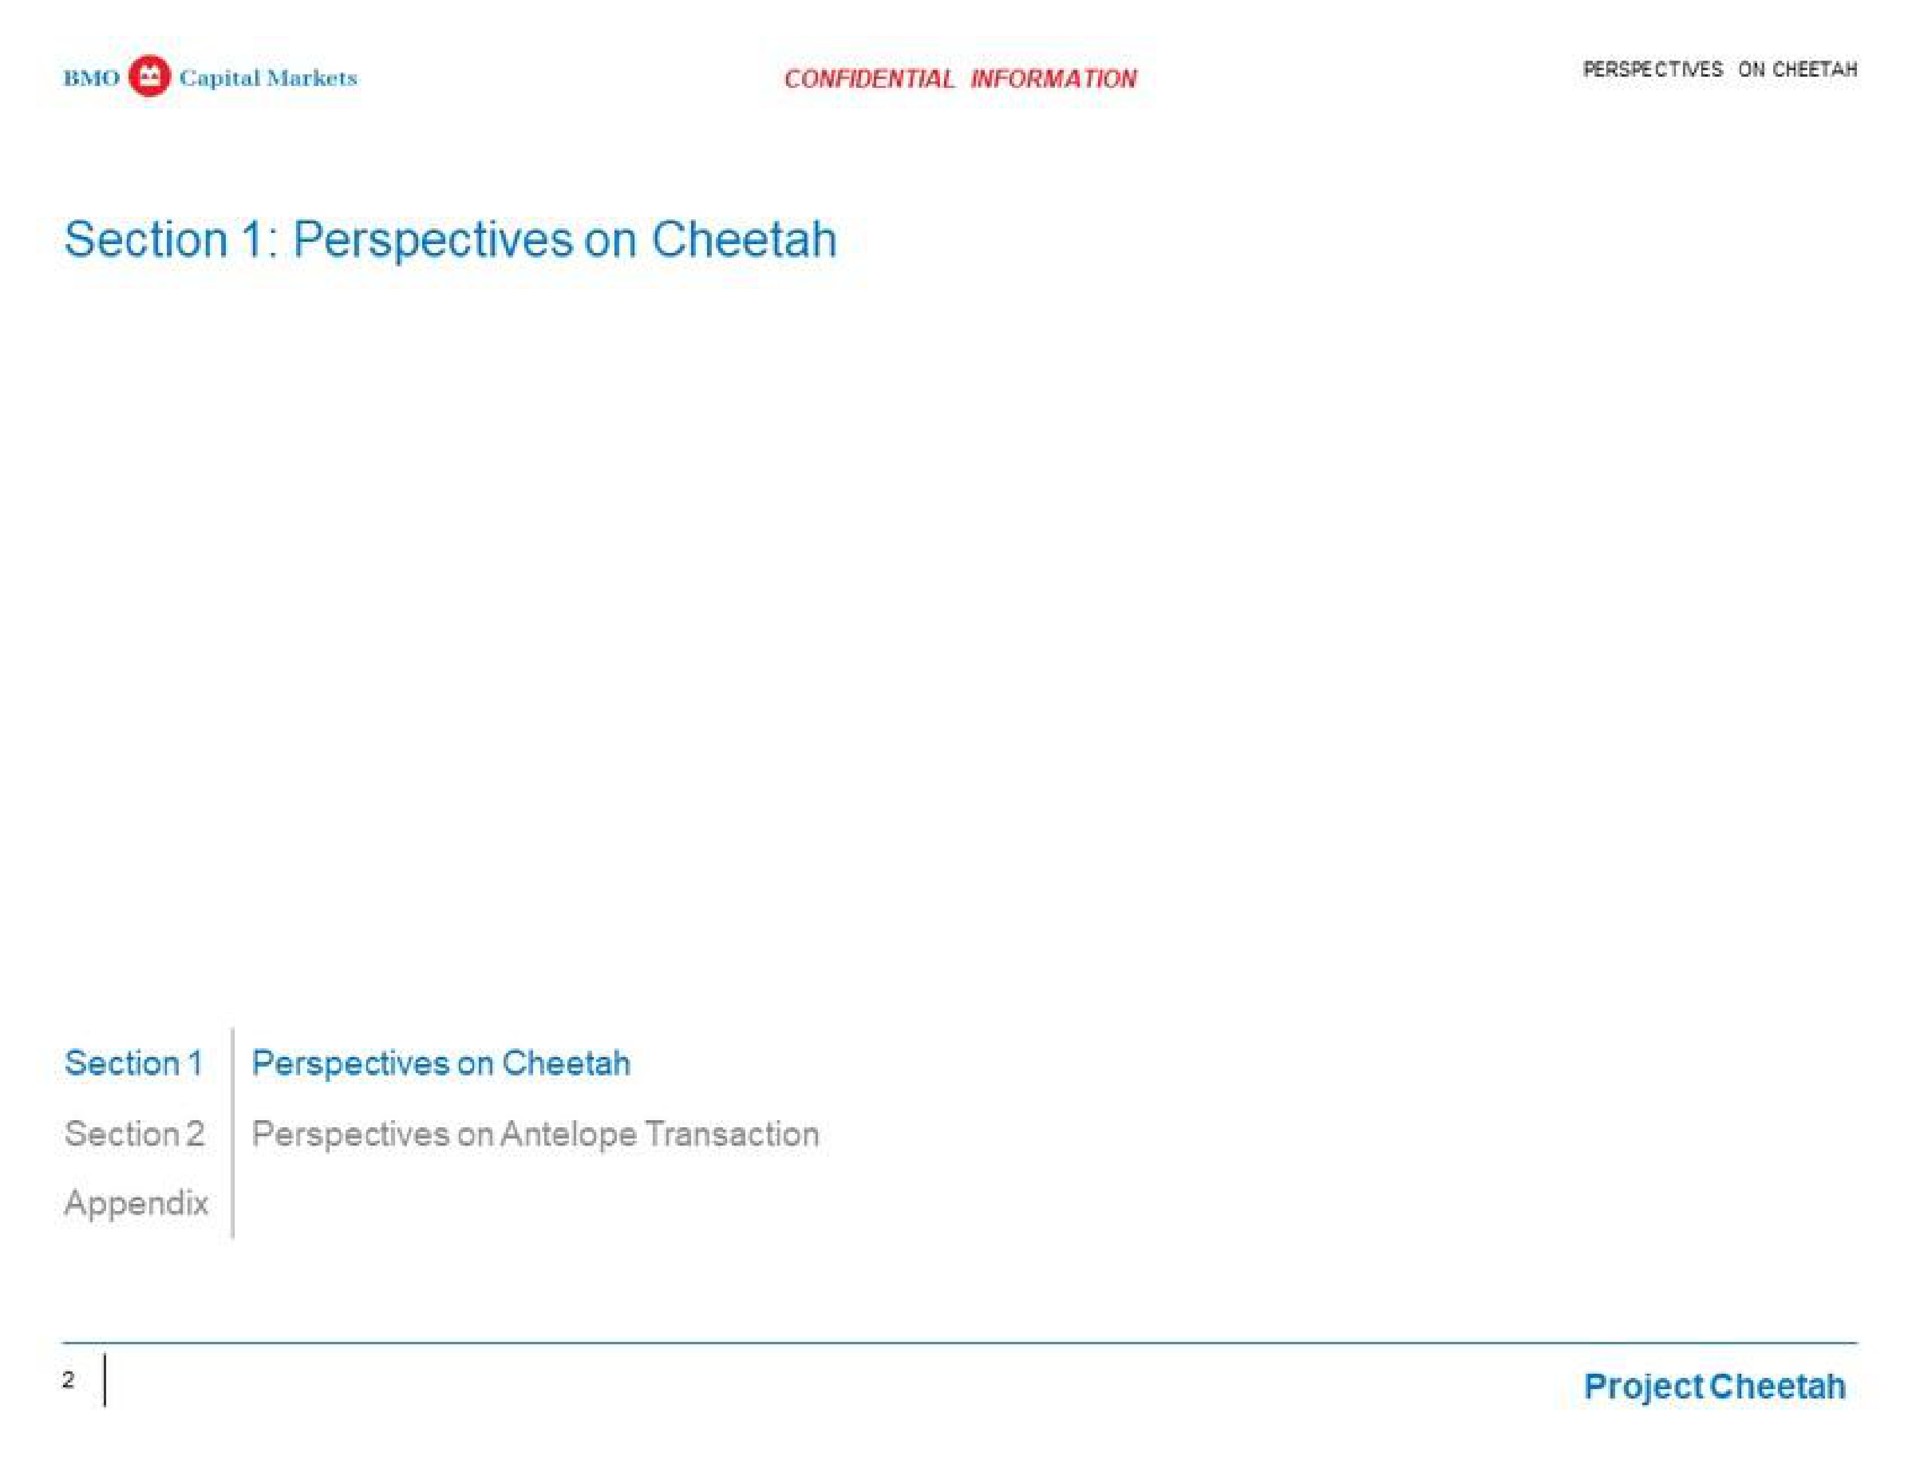 section perspectives on cheetah section perspectives on cheetah section perspectives on antelope transaction appendix project cheetah | BMO Capital Markets